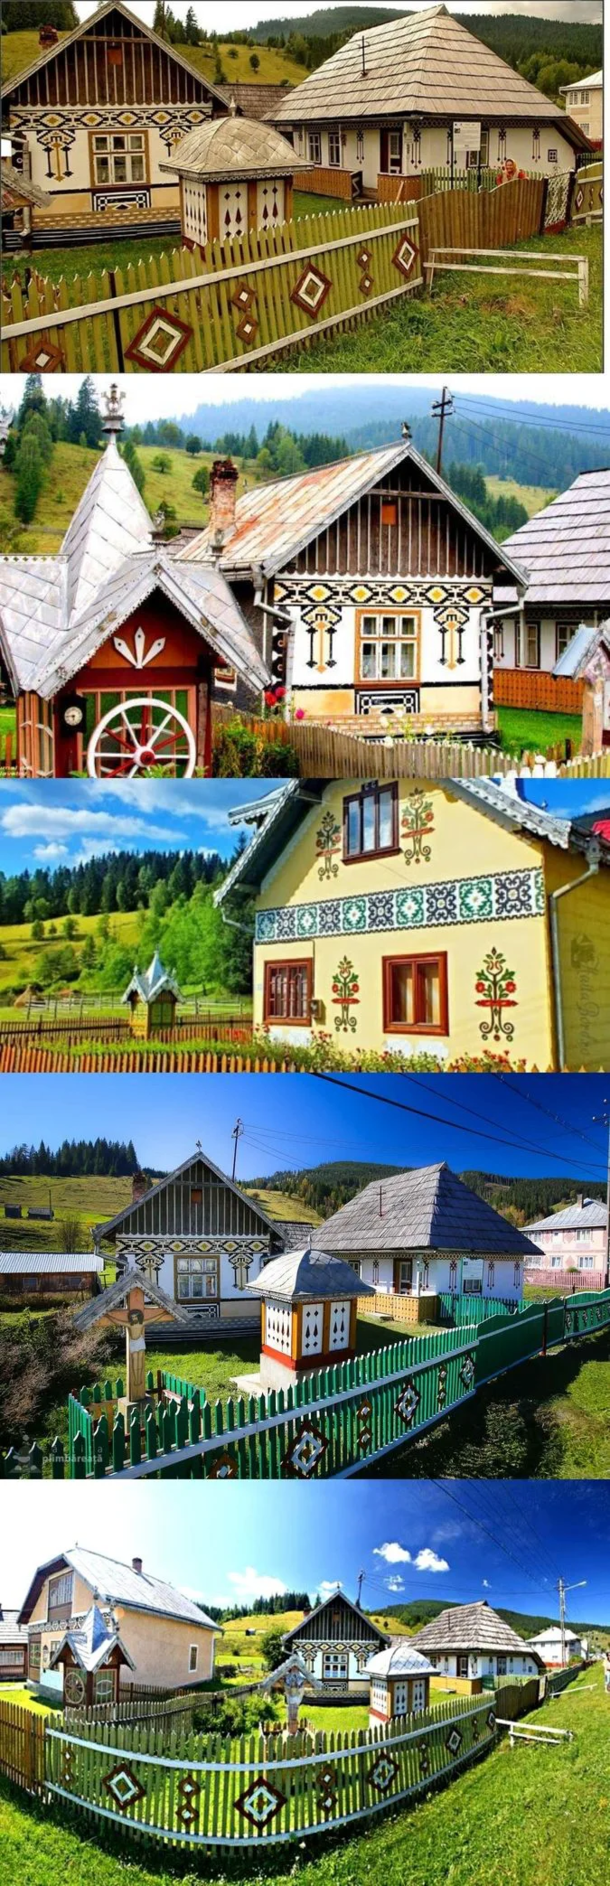 Village in Romania where its mandatory to keep the tradition of painting houses